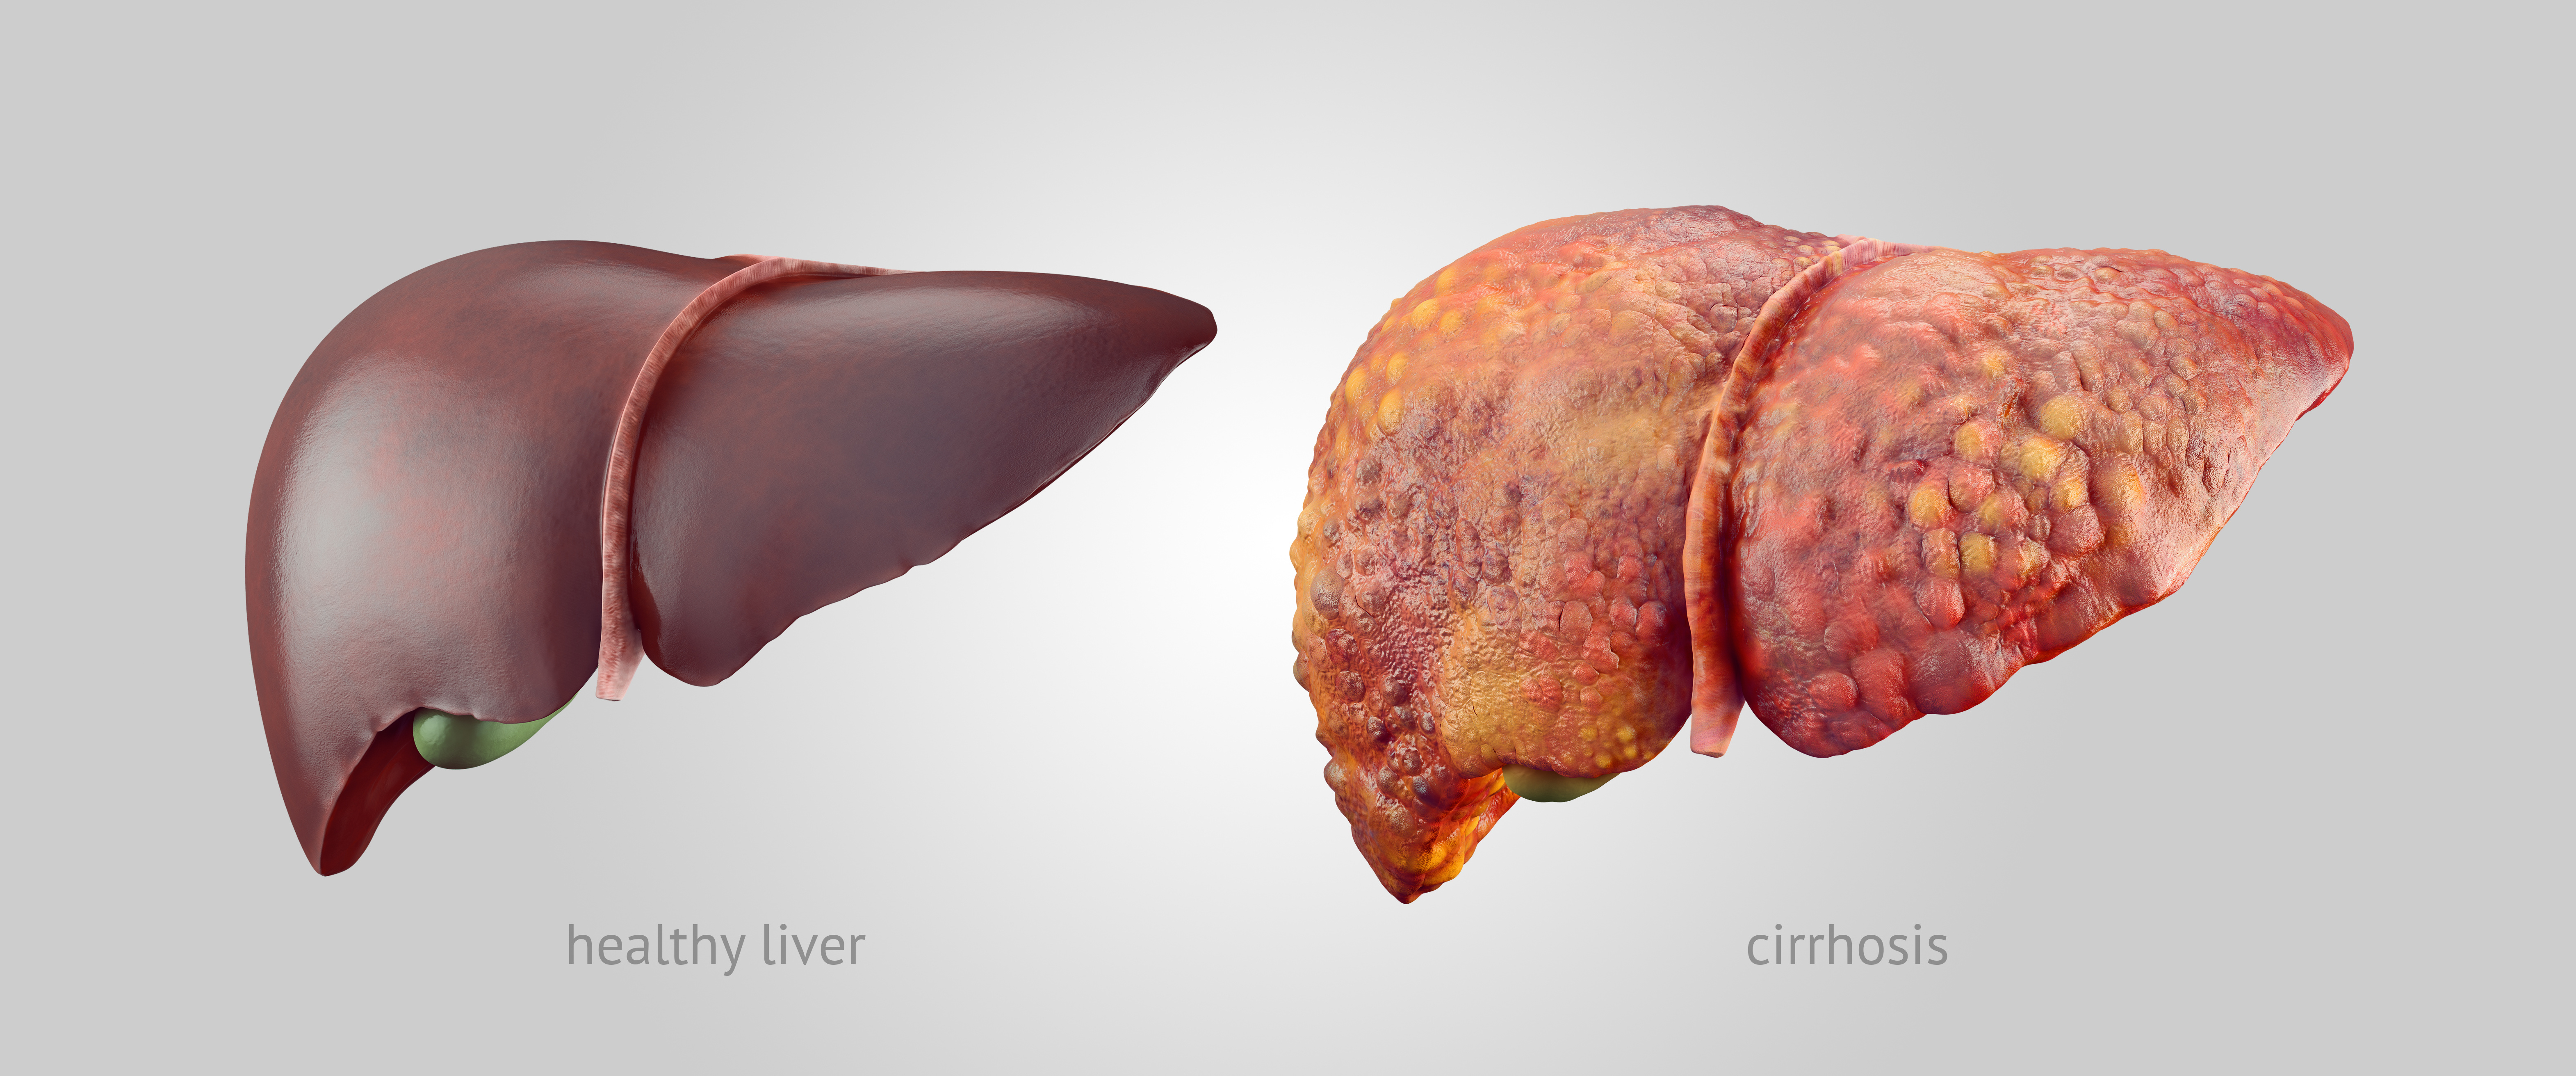 Realistic illustration of healthy and sick human livers